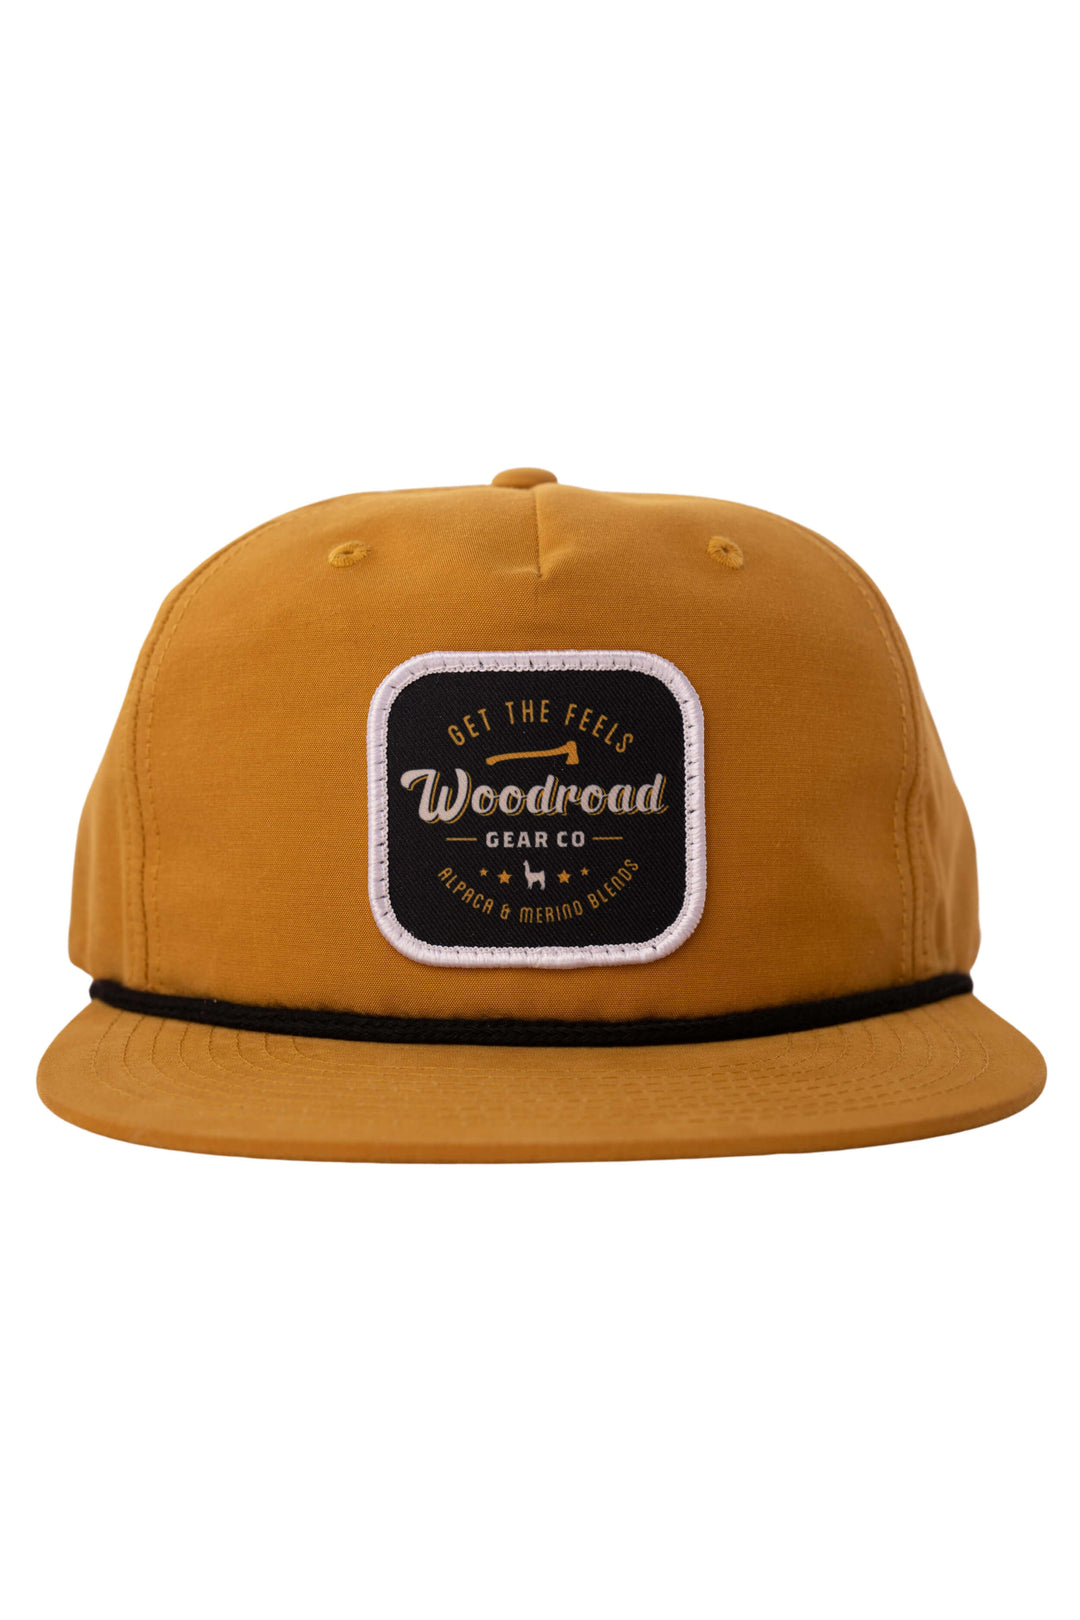 Get The Feels Rope Hat - Woodroad Gear Co.